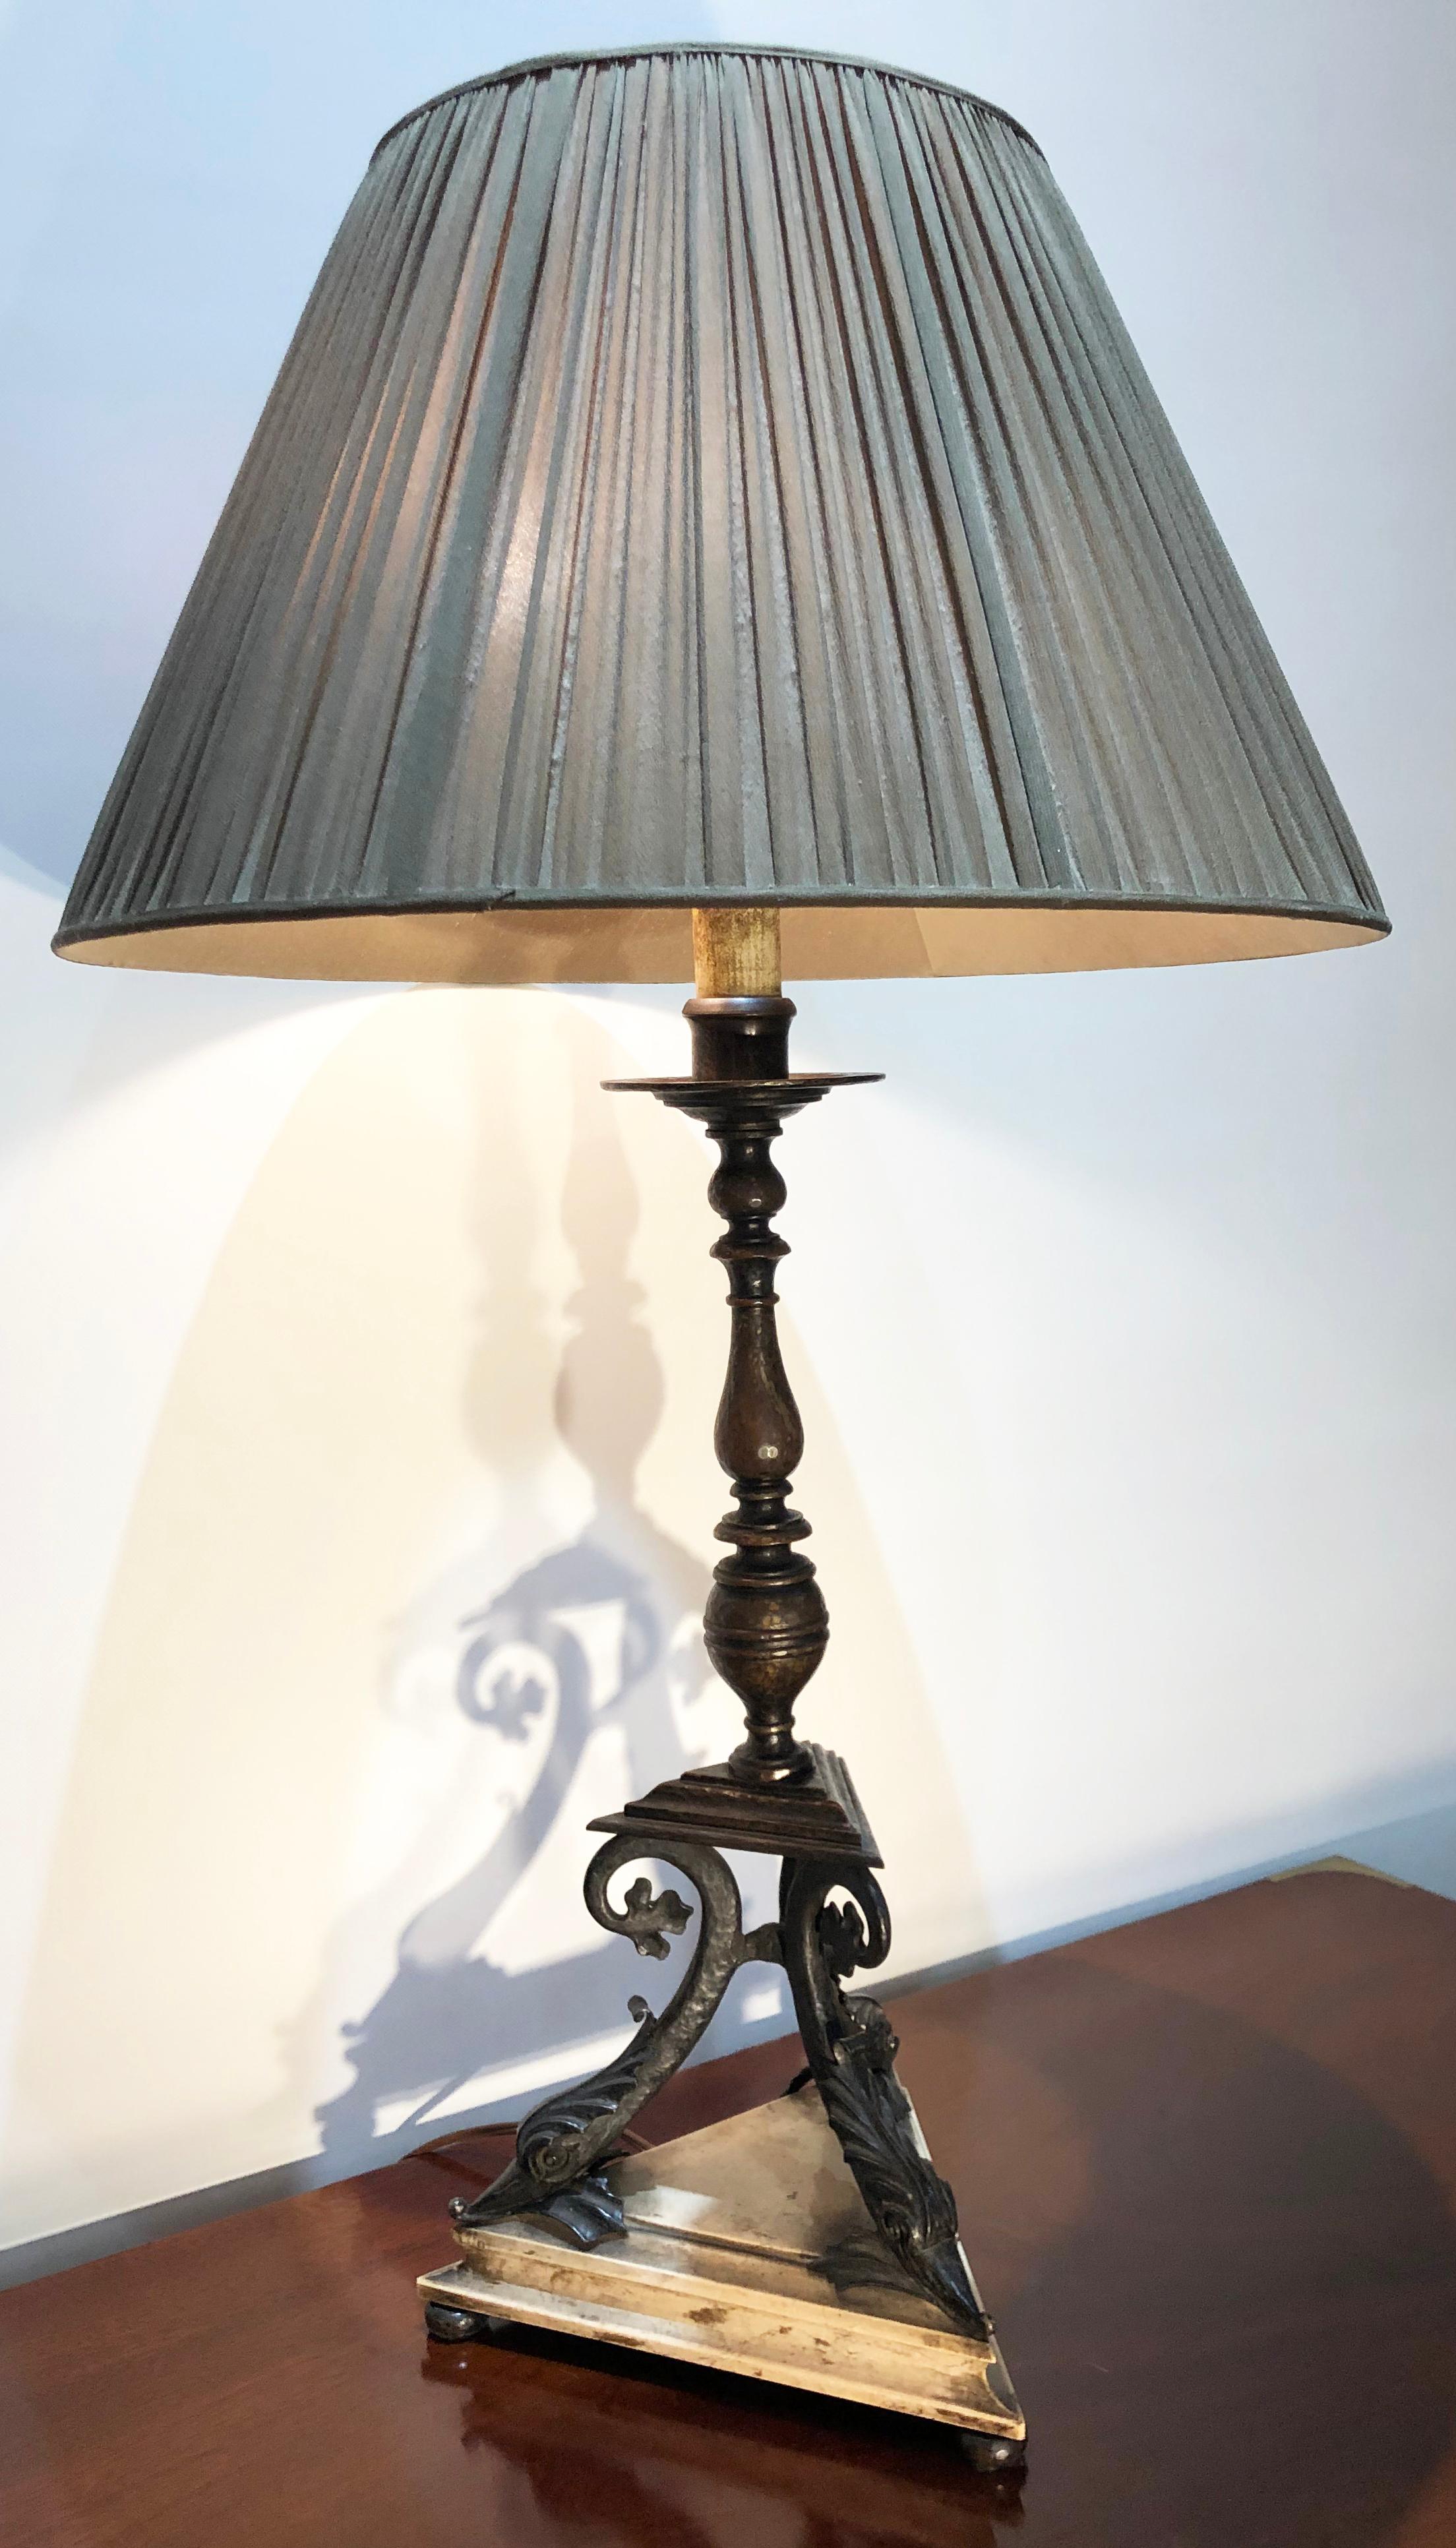 This early 20th century bronze mounted table came from the Estate of Peggy and David Rockefeller. Attributed to E.F. Caldwell, circa 1910. Wonderful dolphin motif at the base of the lamp. The bronze lamp is mounted to a wooden base with 3 bronze